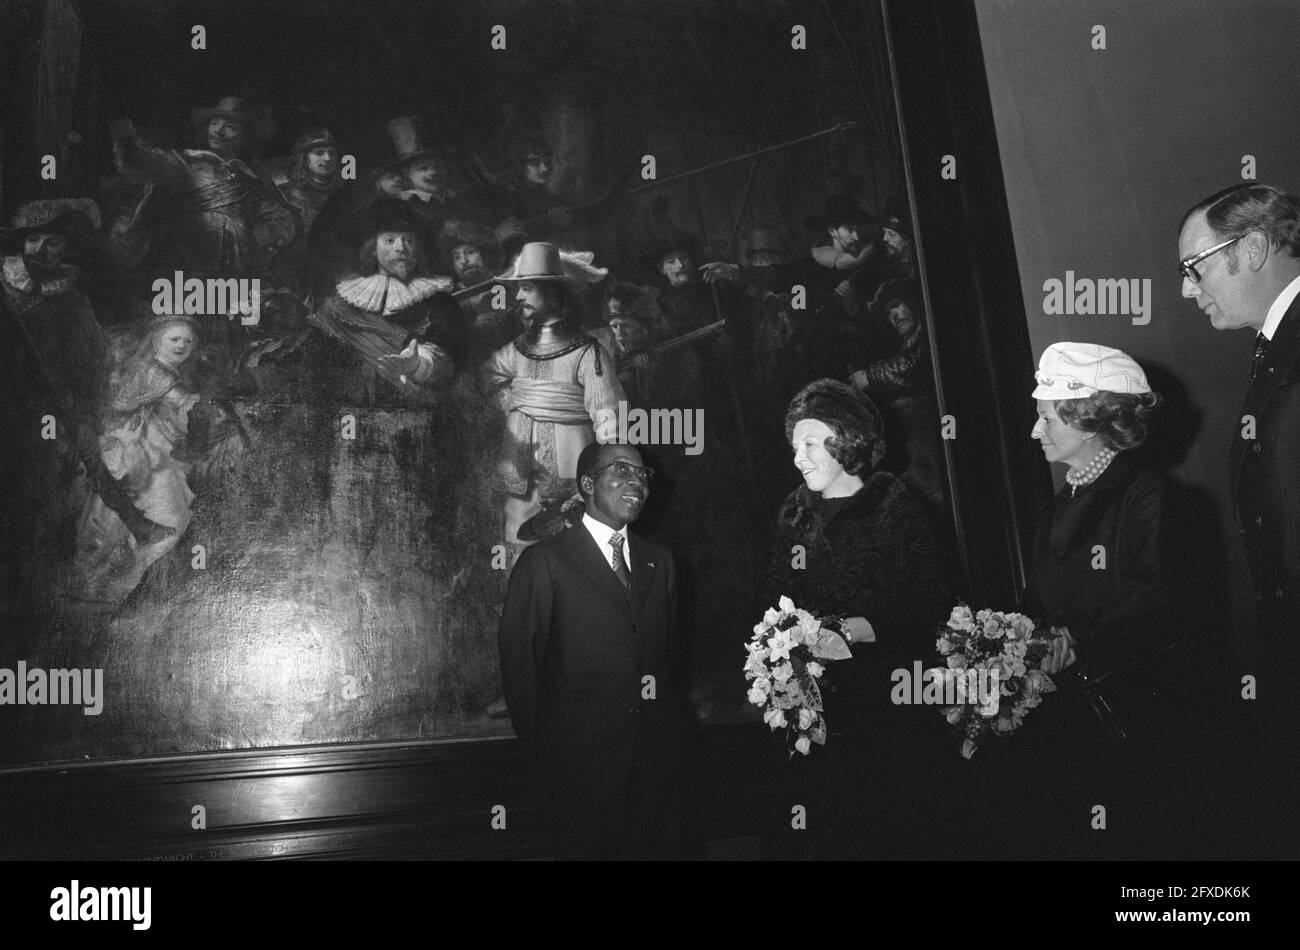 State visit President Senghor of Senegal to the Netherlands Senghor visits Rijksmuseum in Amsterdam, 22 October 1974, presidents, state visits, The Netherlands, 20th century press agency photo, news to remember, documentary, historic photography 1945-1990, visual stories, human history of the Twentieth Century, capturing moments in time Stock Photo